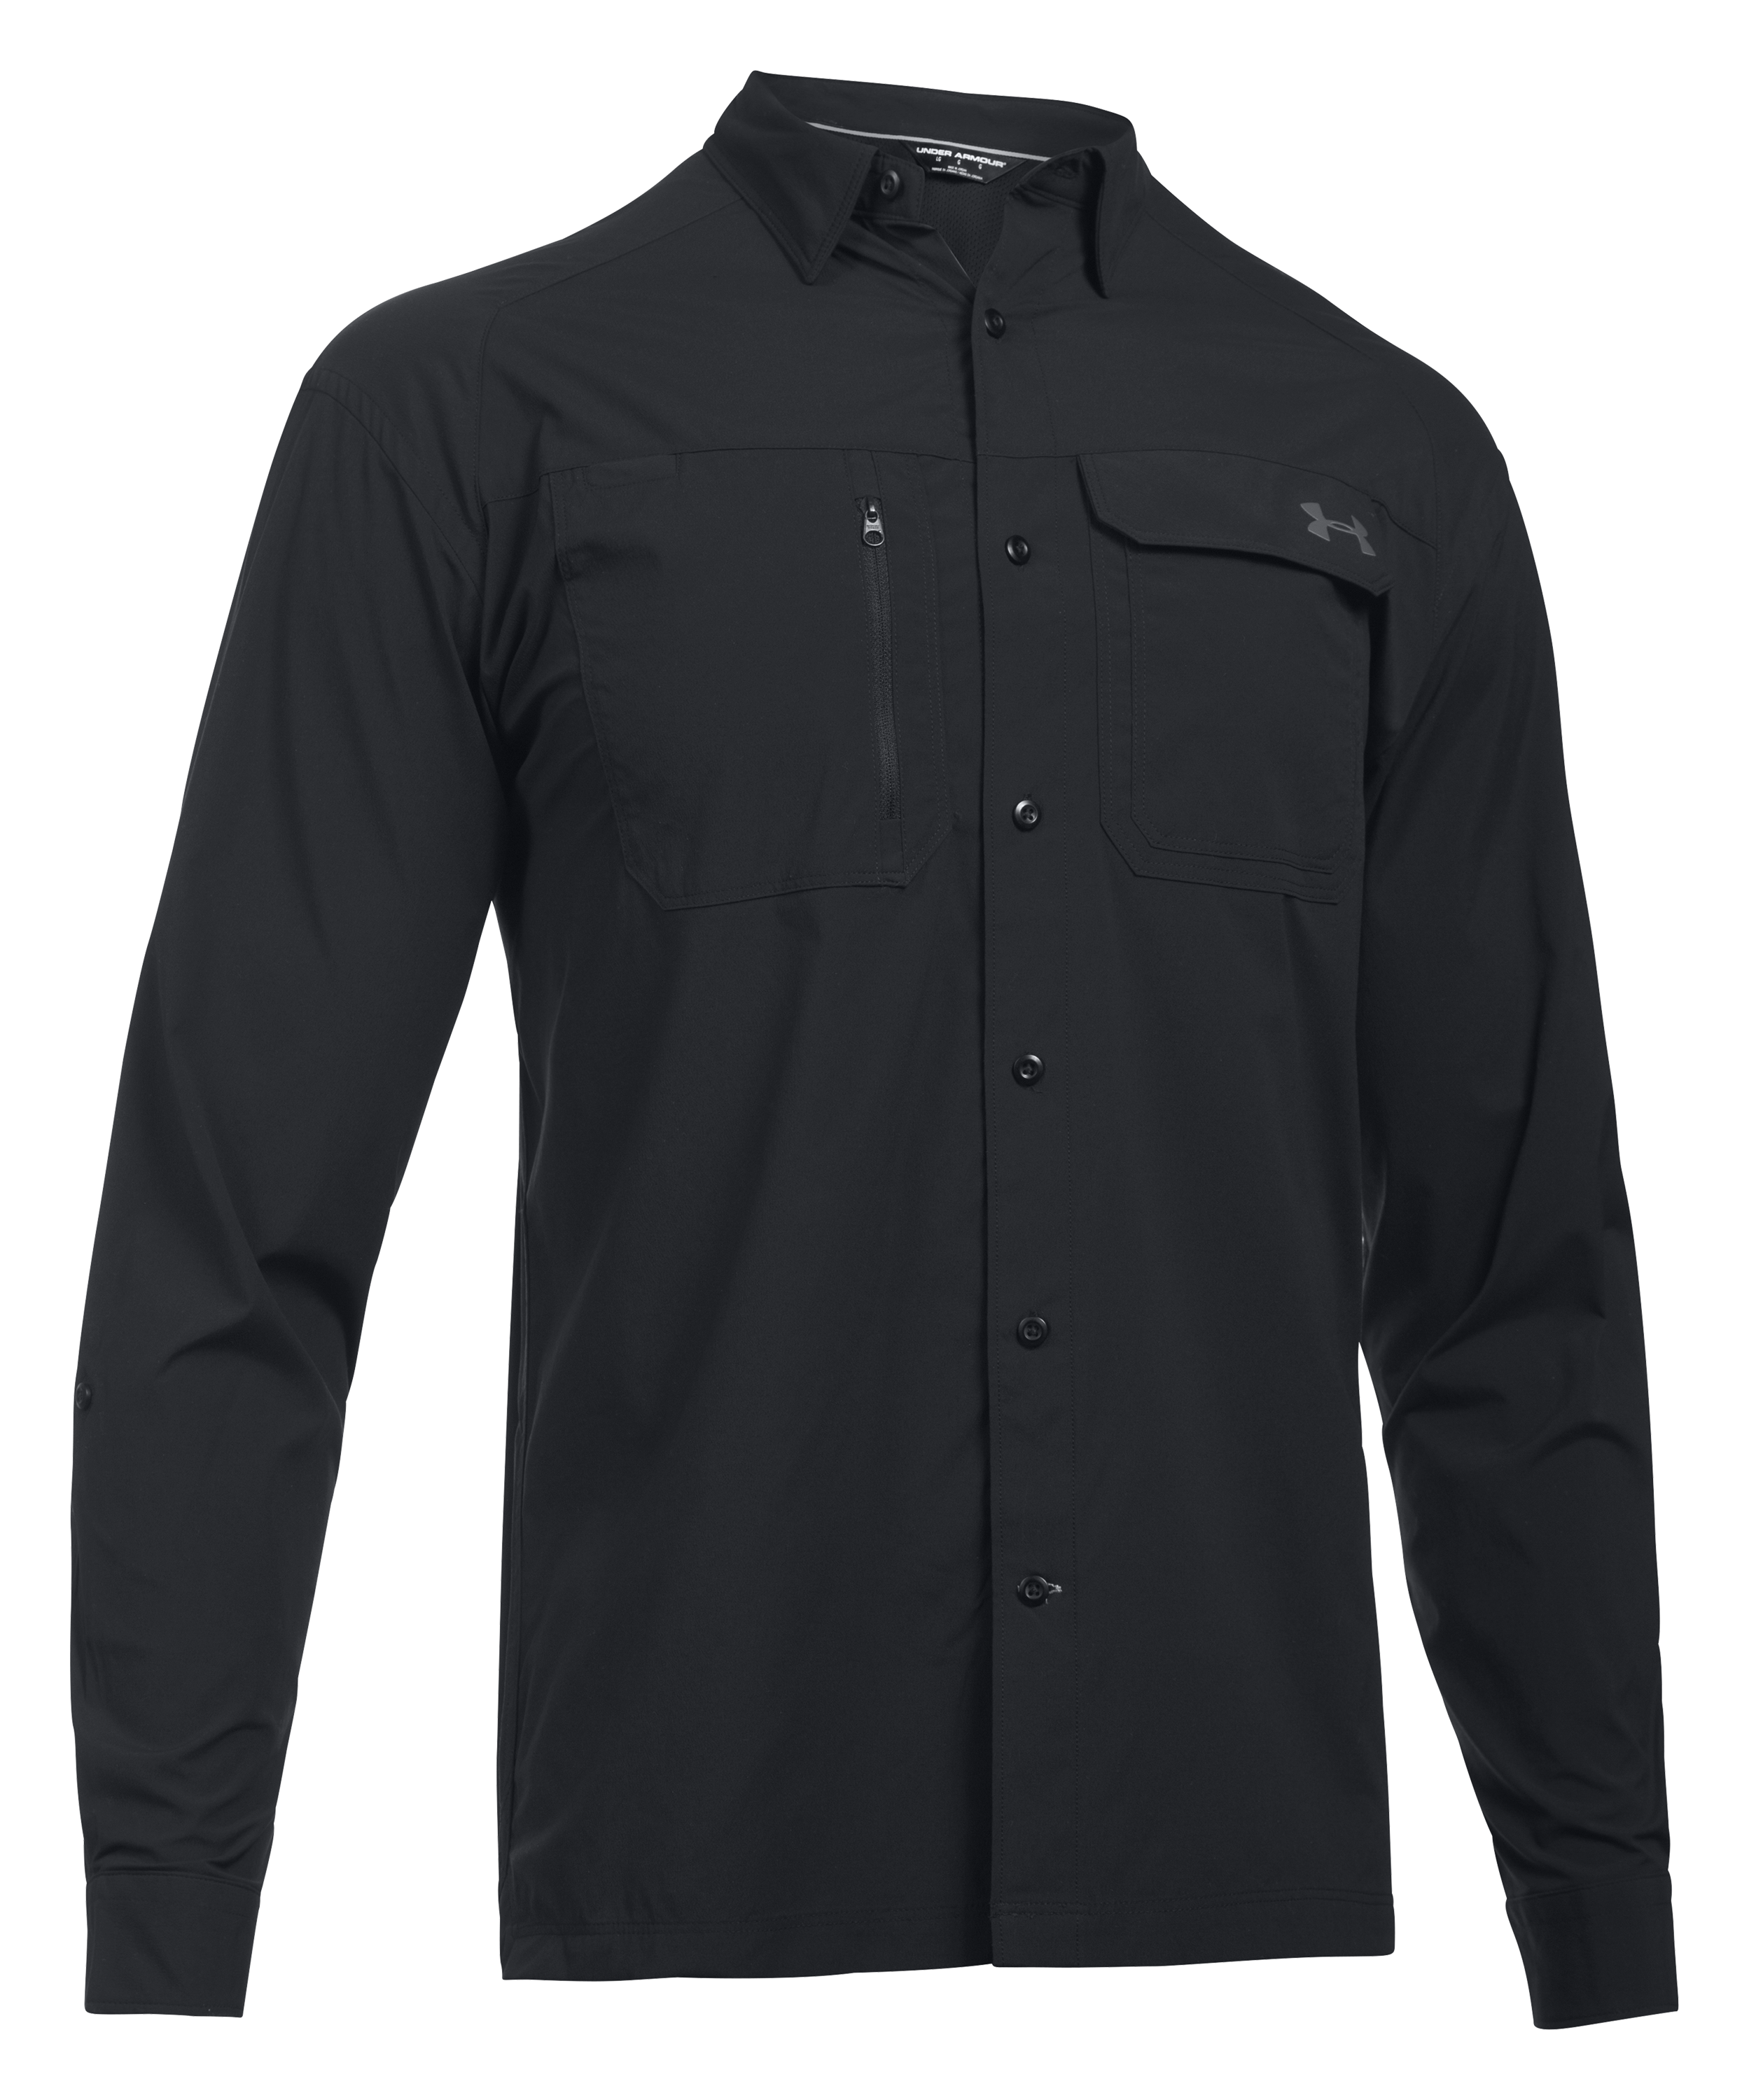  Under Armour Fishing Shirts For Men